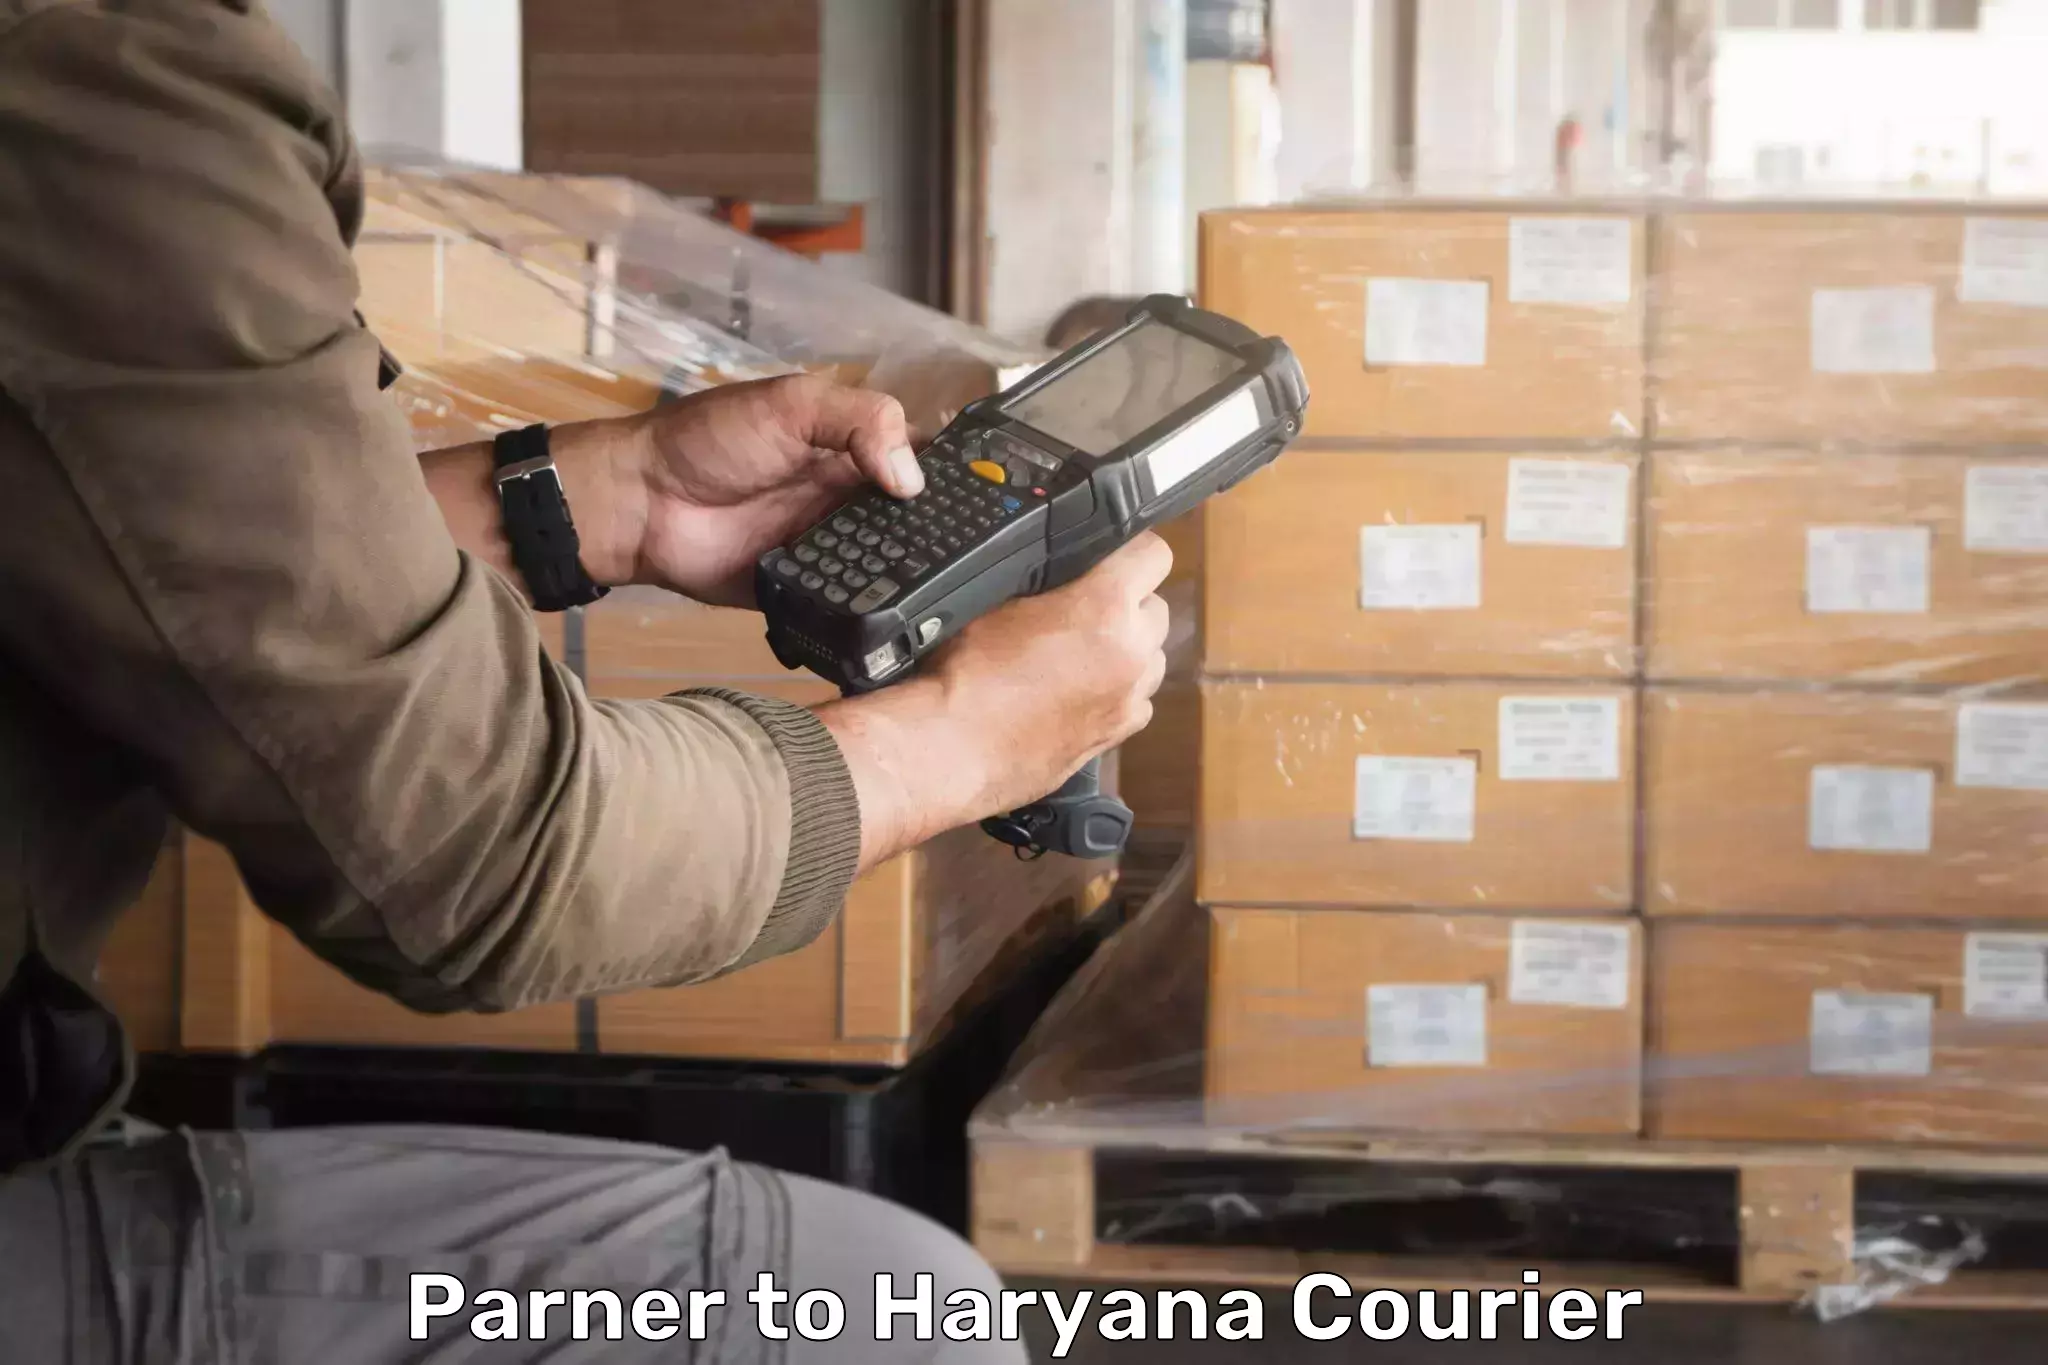 On-demand shipping options Parner to Haryana